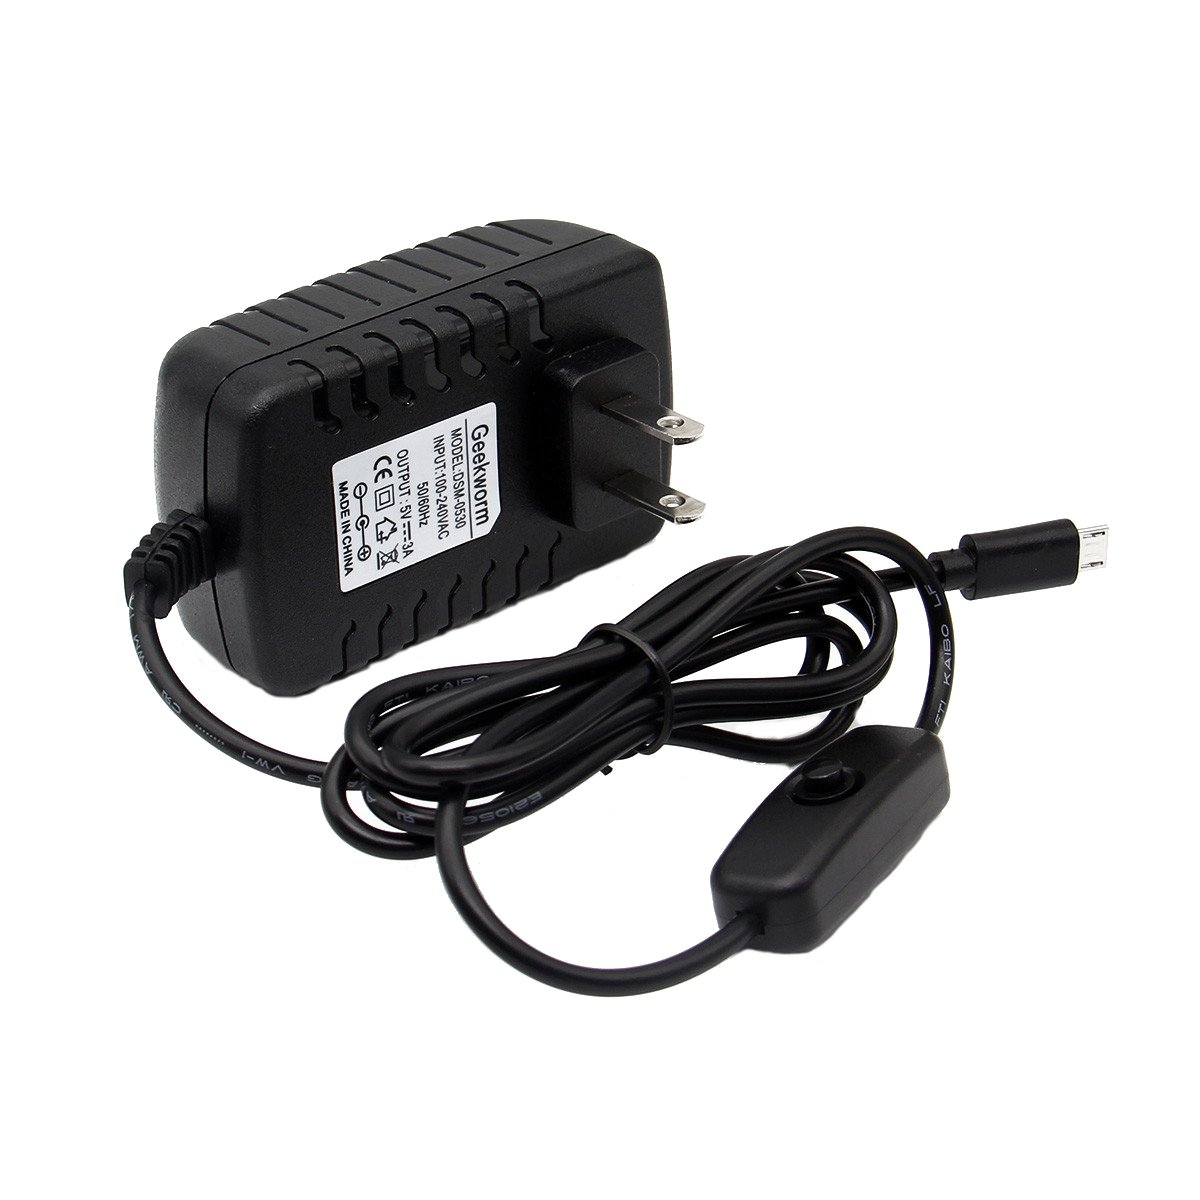 Geekworm US Standard DC 5V 3.0A Power Supply Adapter with Switch For Raspberry Pi 2